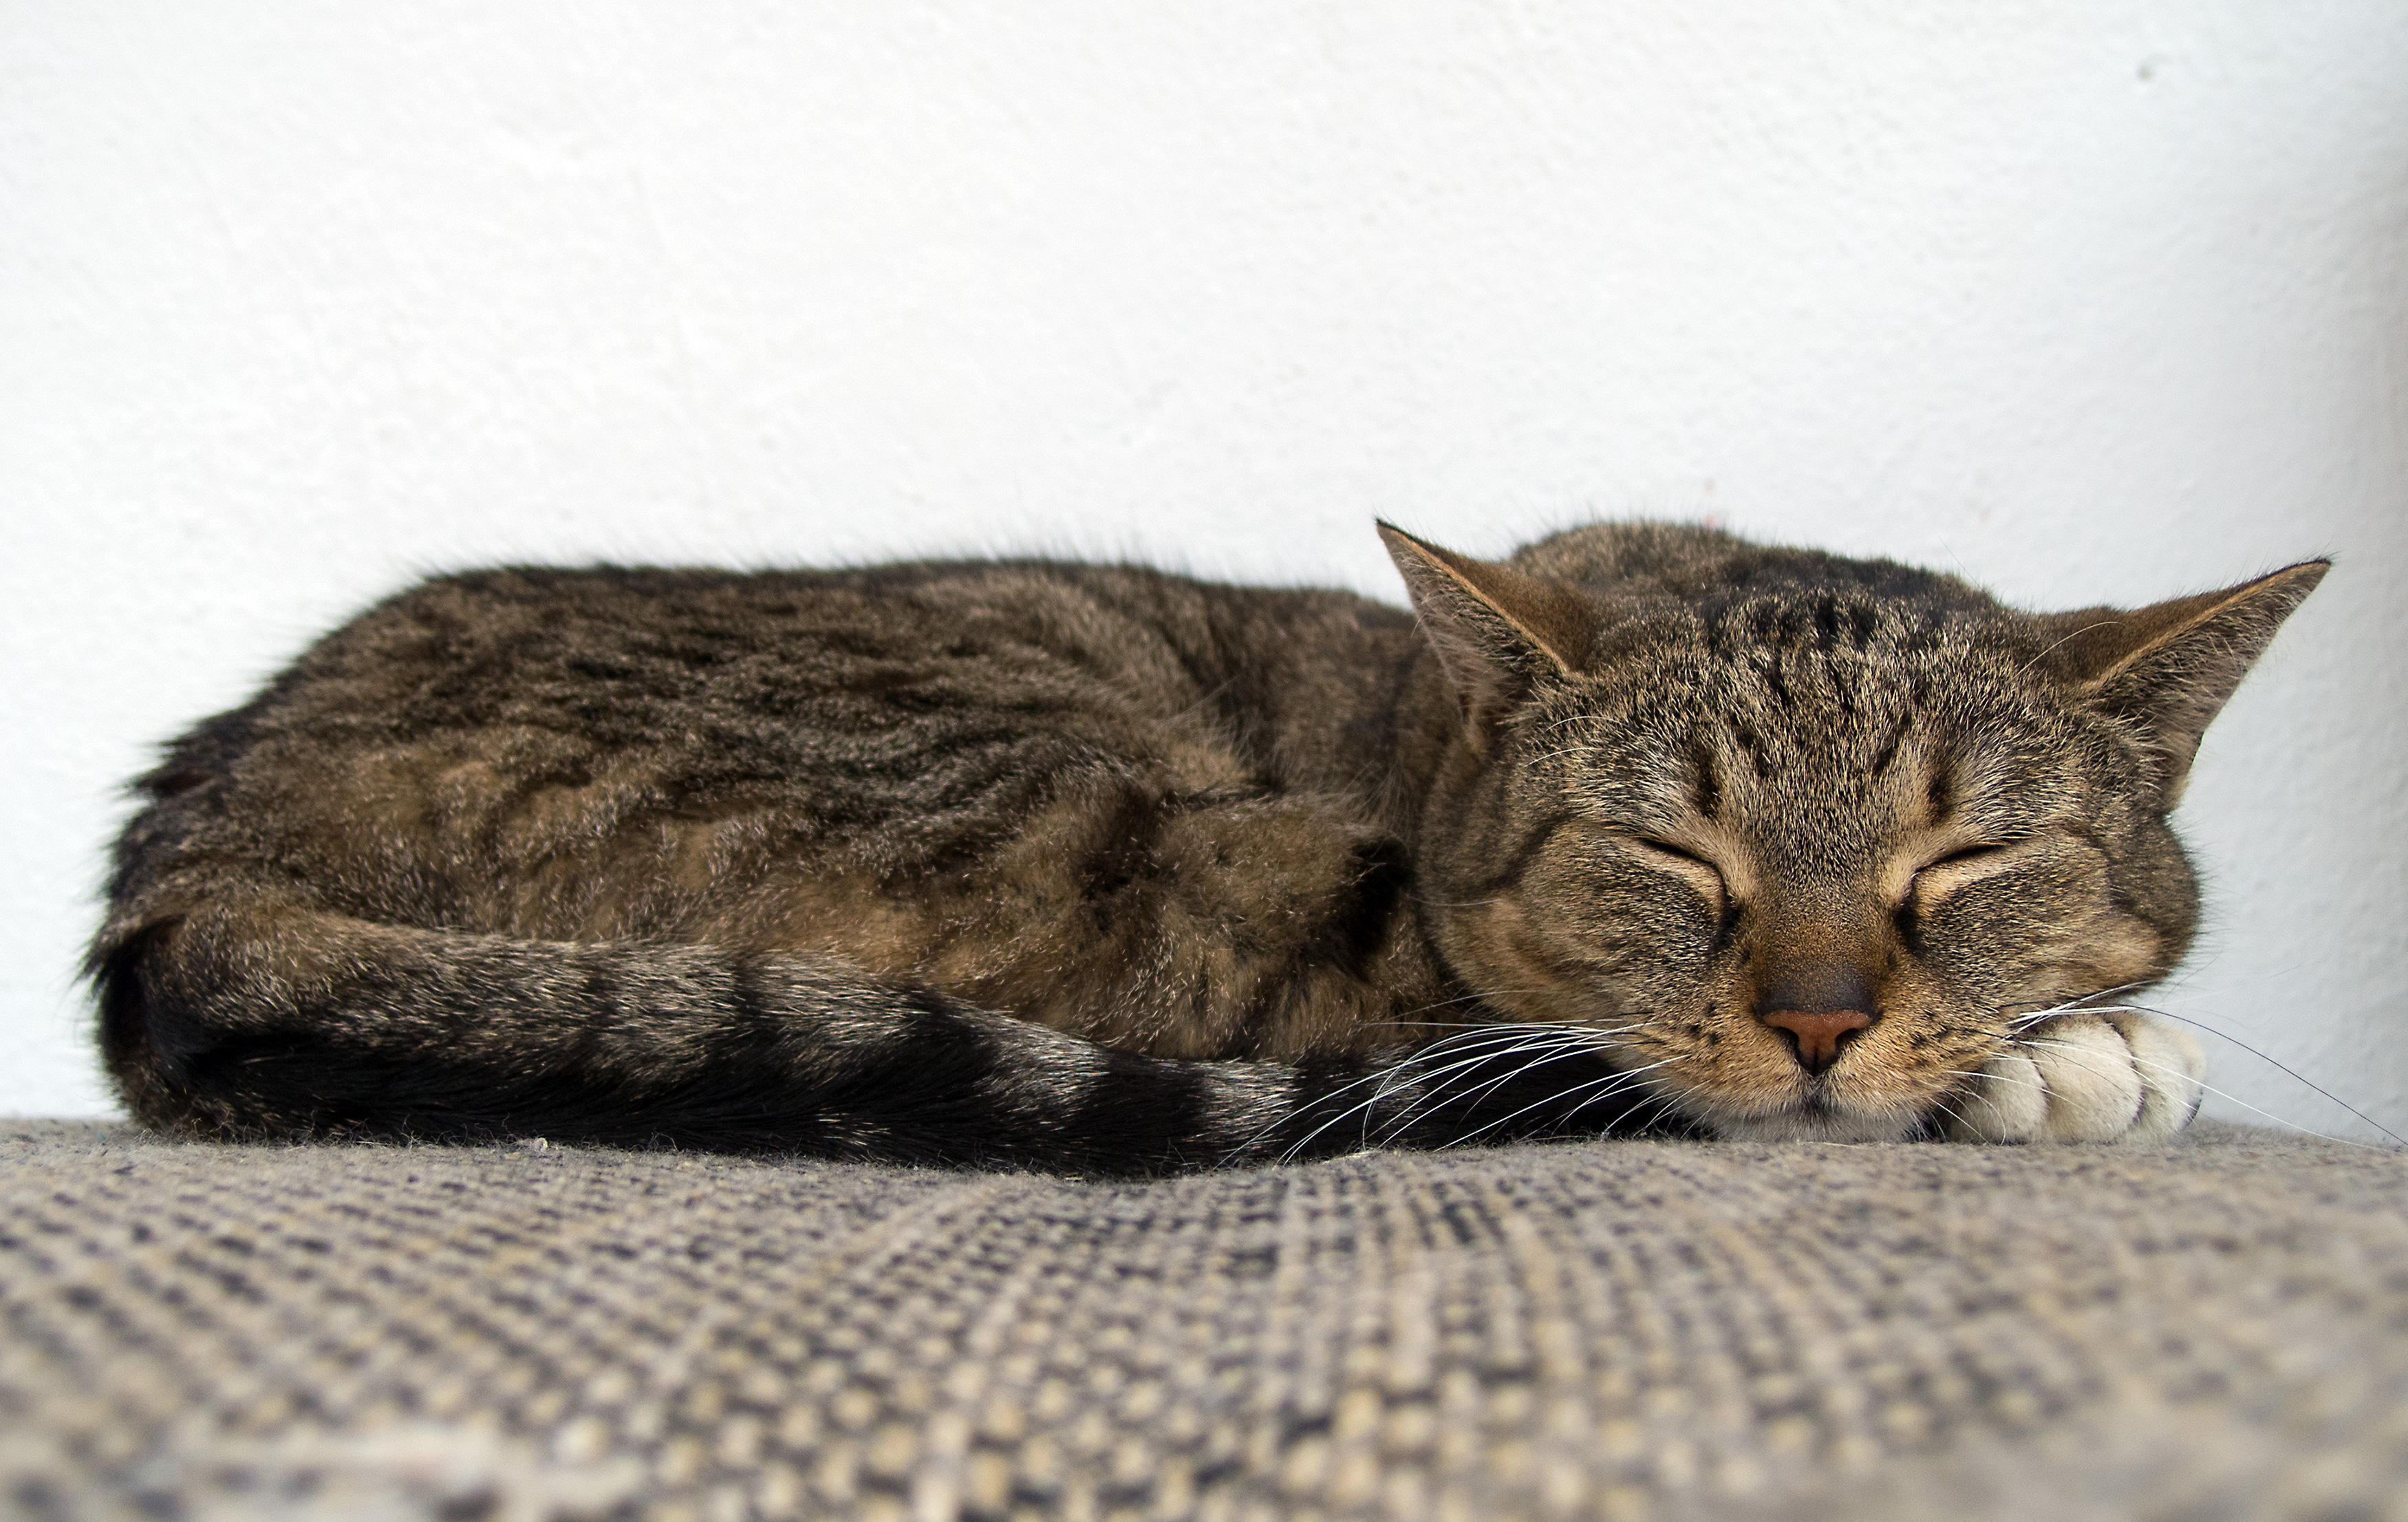 Free Image: Cat Sleeping On The Couch | Libreshot Public Domain Photos